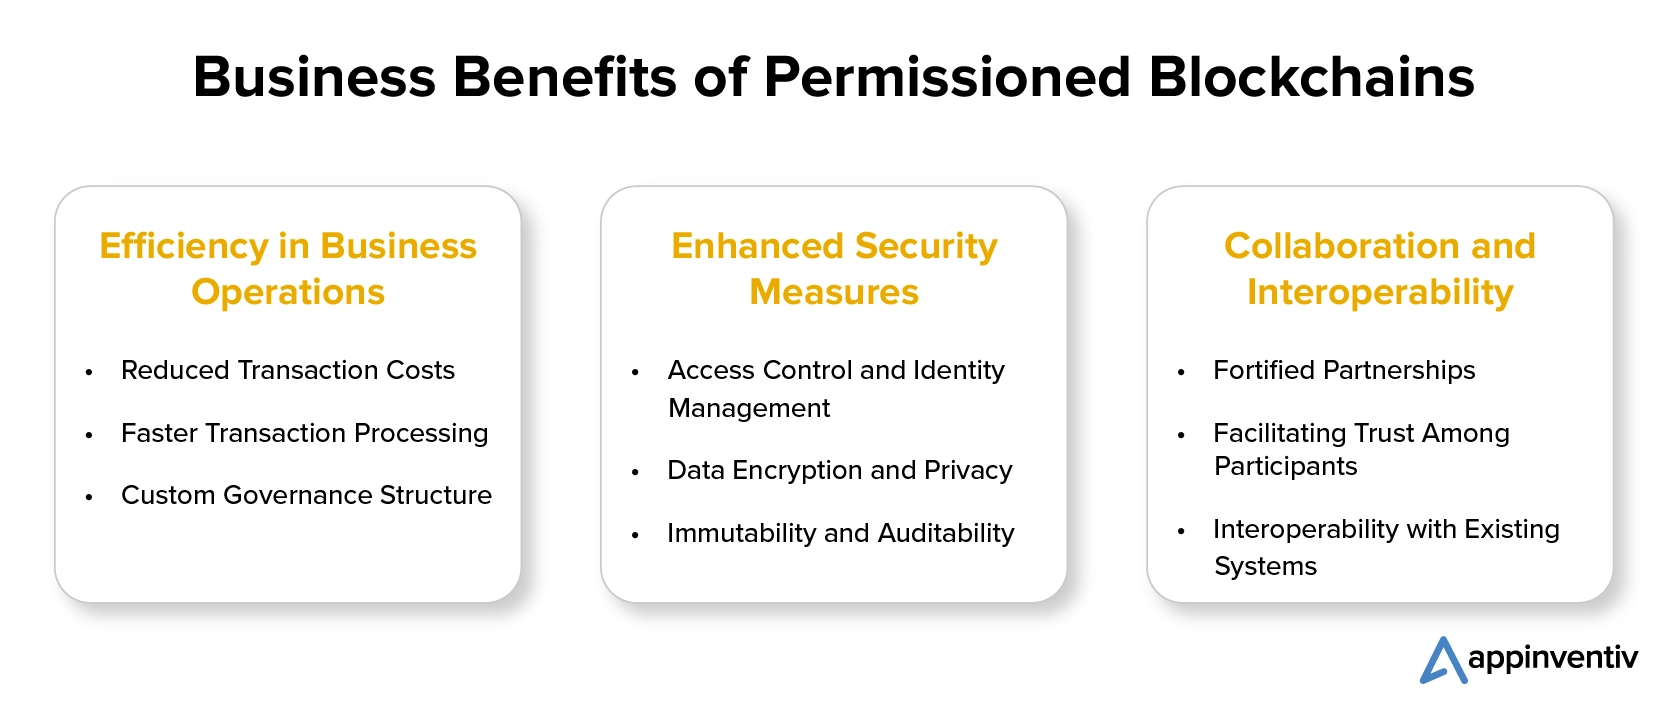 Business Benefits of Permissioned Blockchains